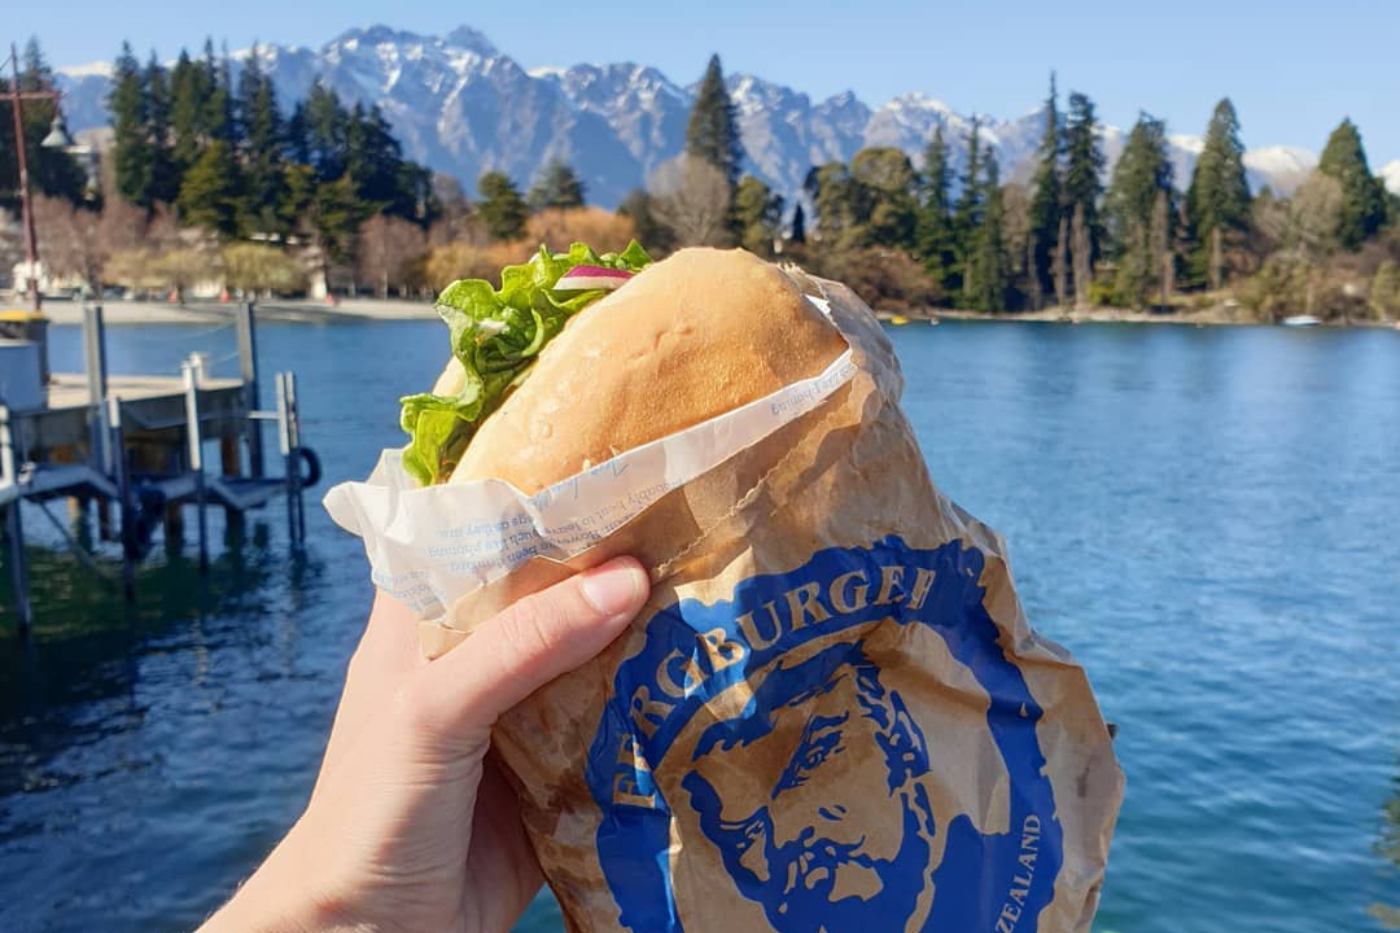 holding burger in front of lake and mountains